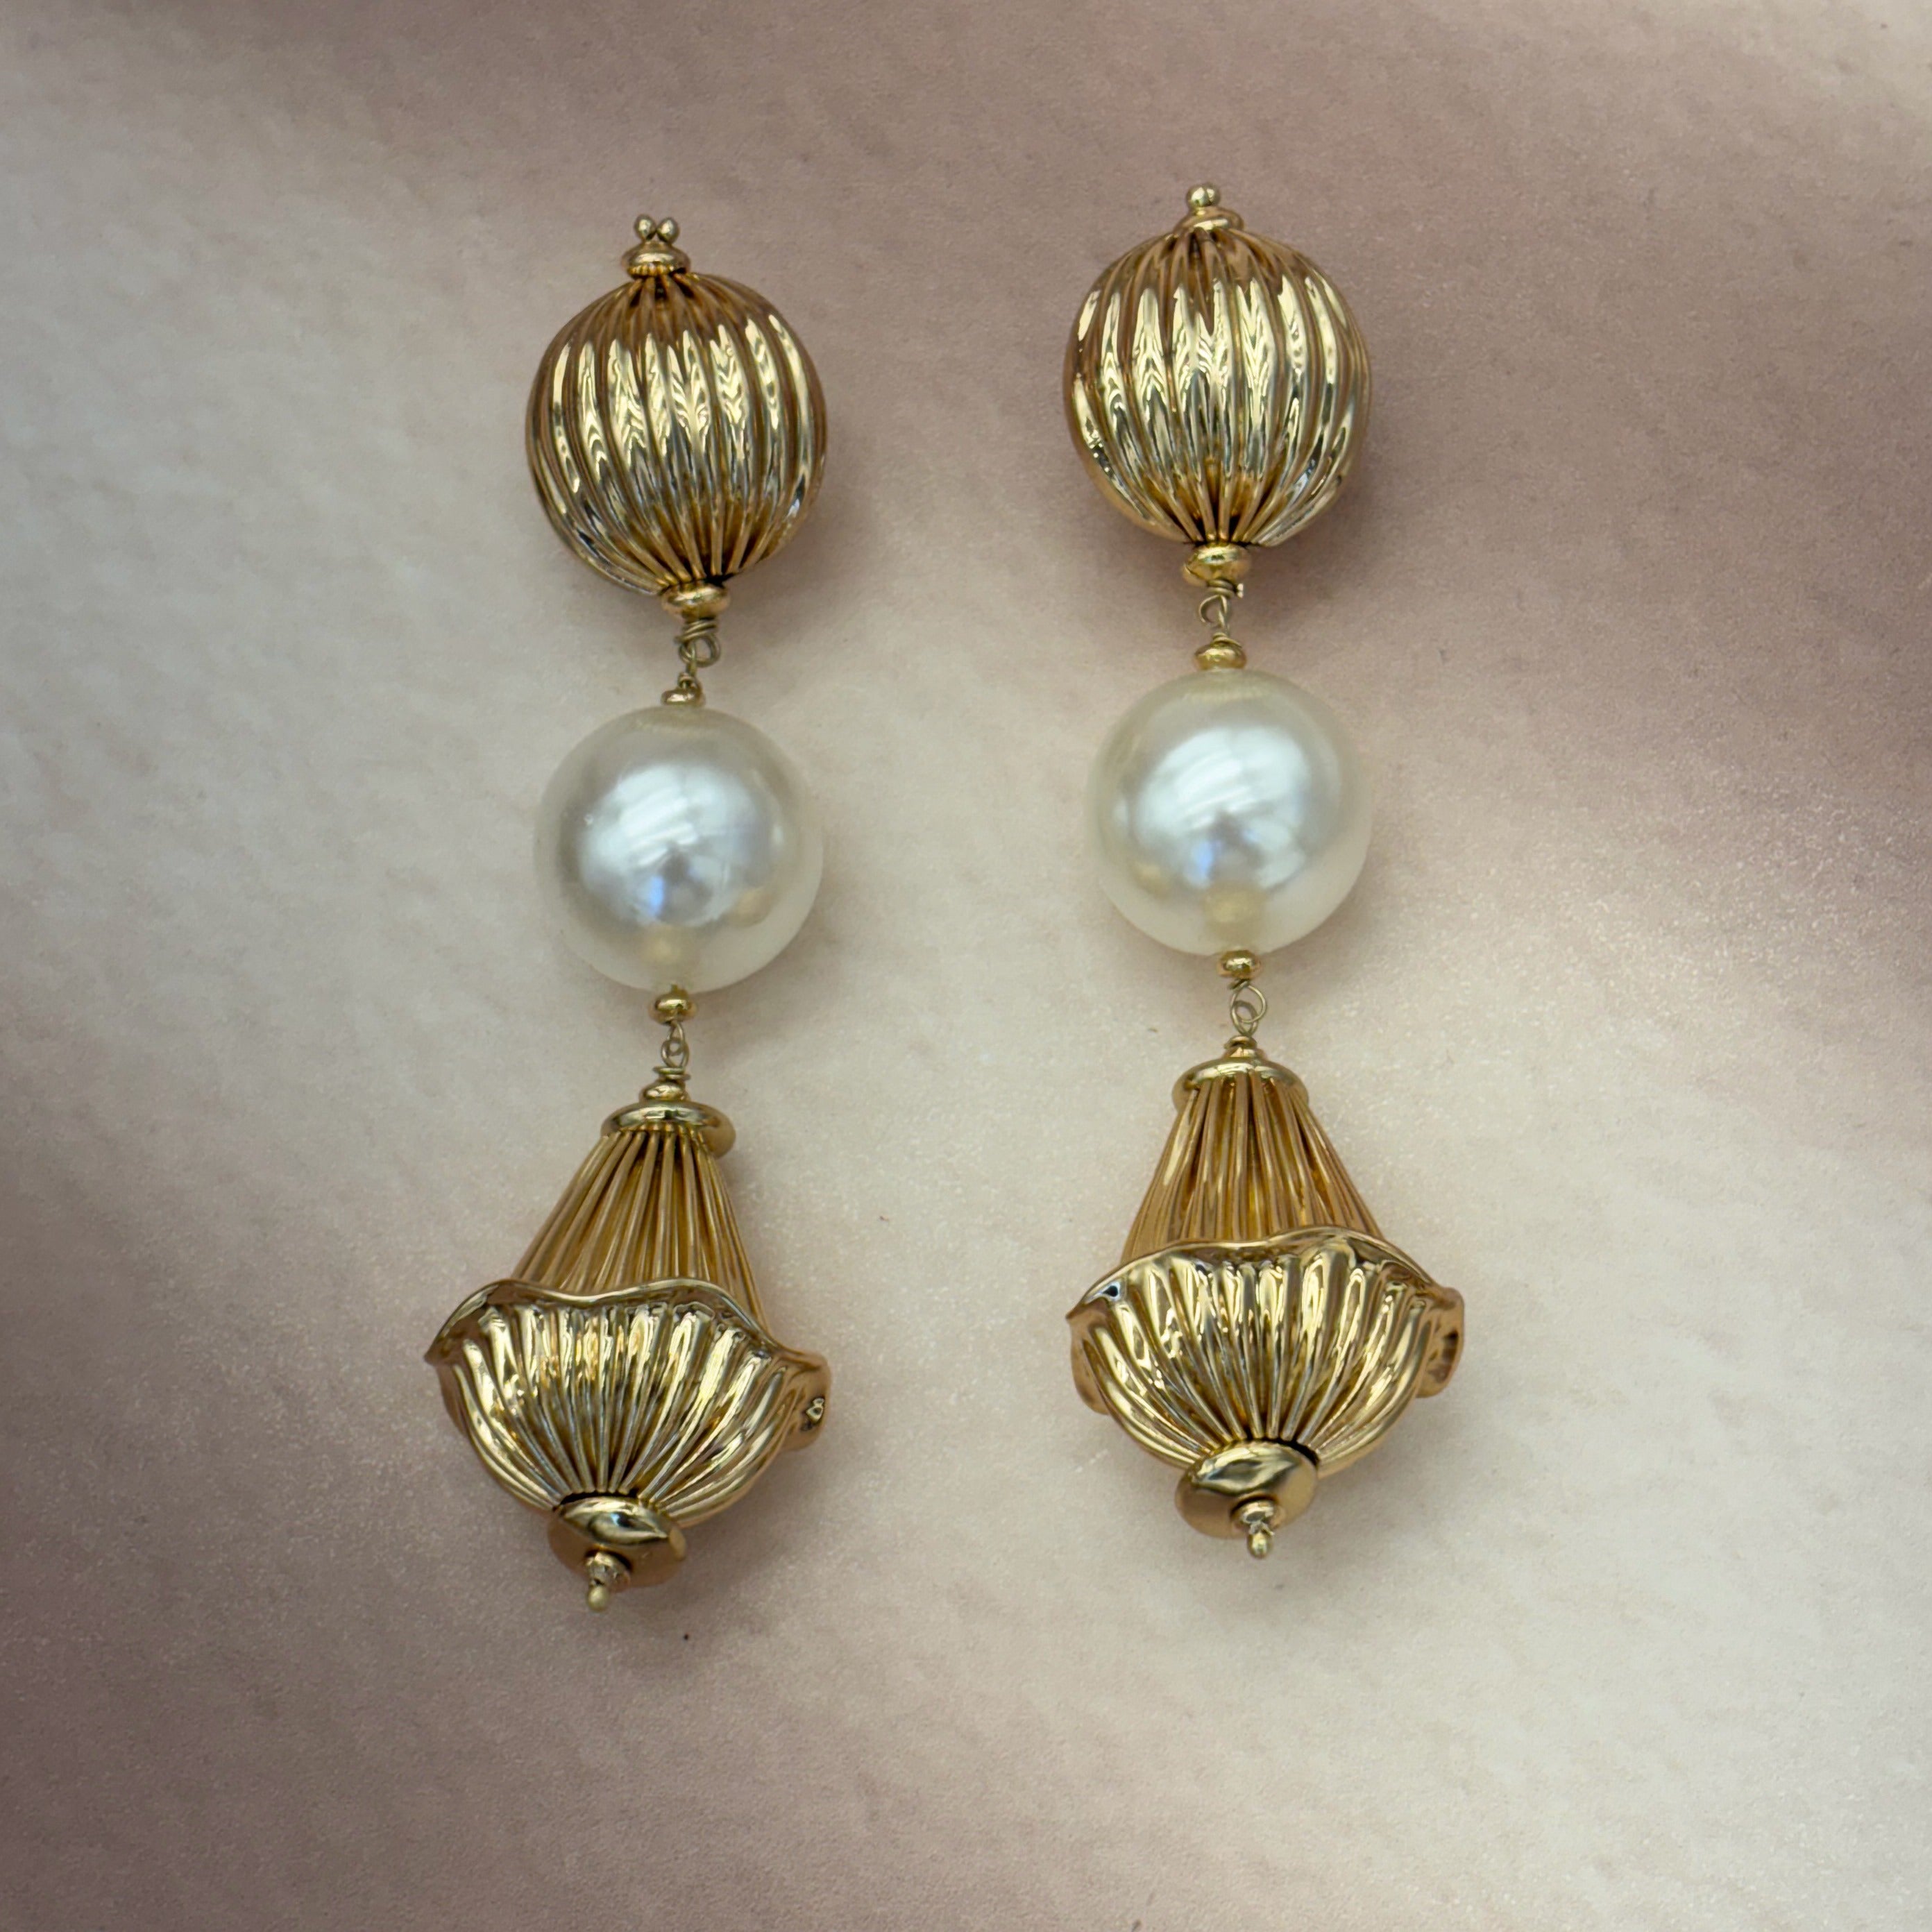 TFC Varied Vortex Bold Bead and Pearl Gold Plated Shoulder Duster Dangler Earrings